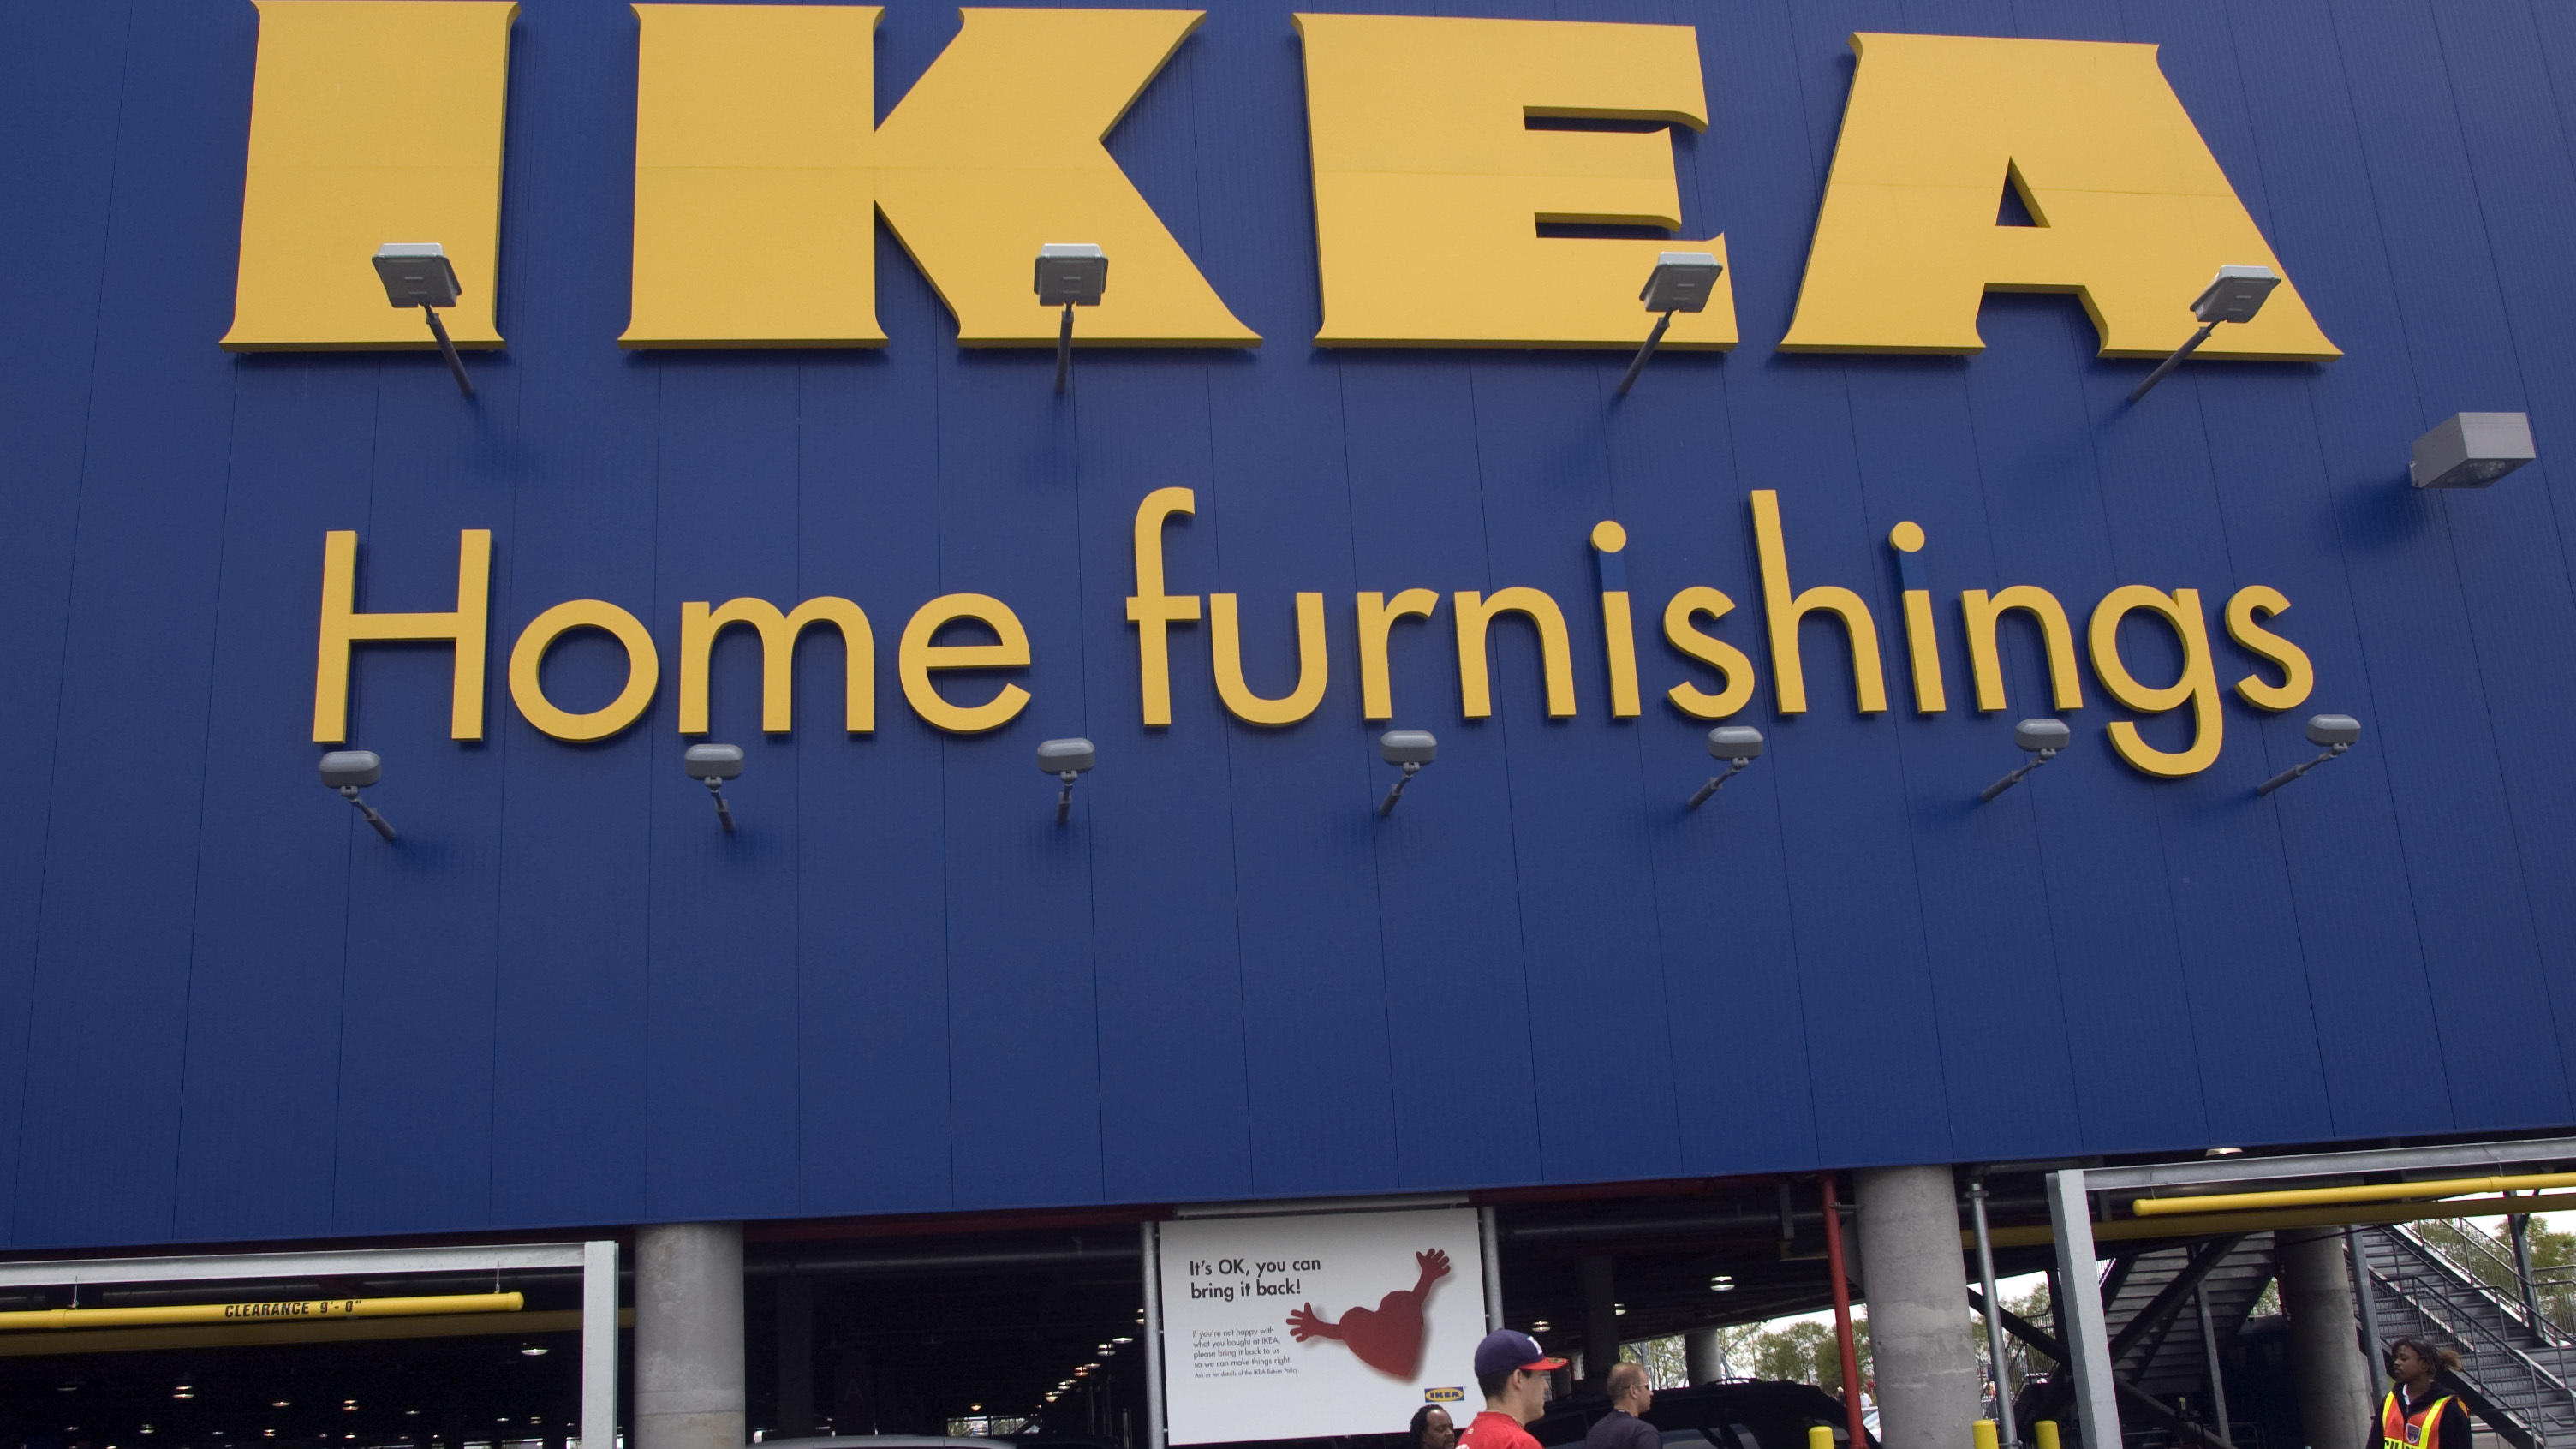 The opening day of the Ikea home furnishings store in the Red Hook neighborhood in the borough of Brooklyn in New York on Wednesday, June 18, 2008. The Swedish home furnishings giant Ikea has bought the handyman labor market start-up TaskRabbit for a